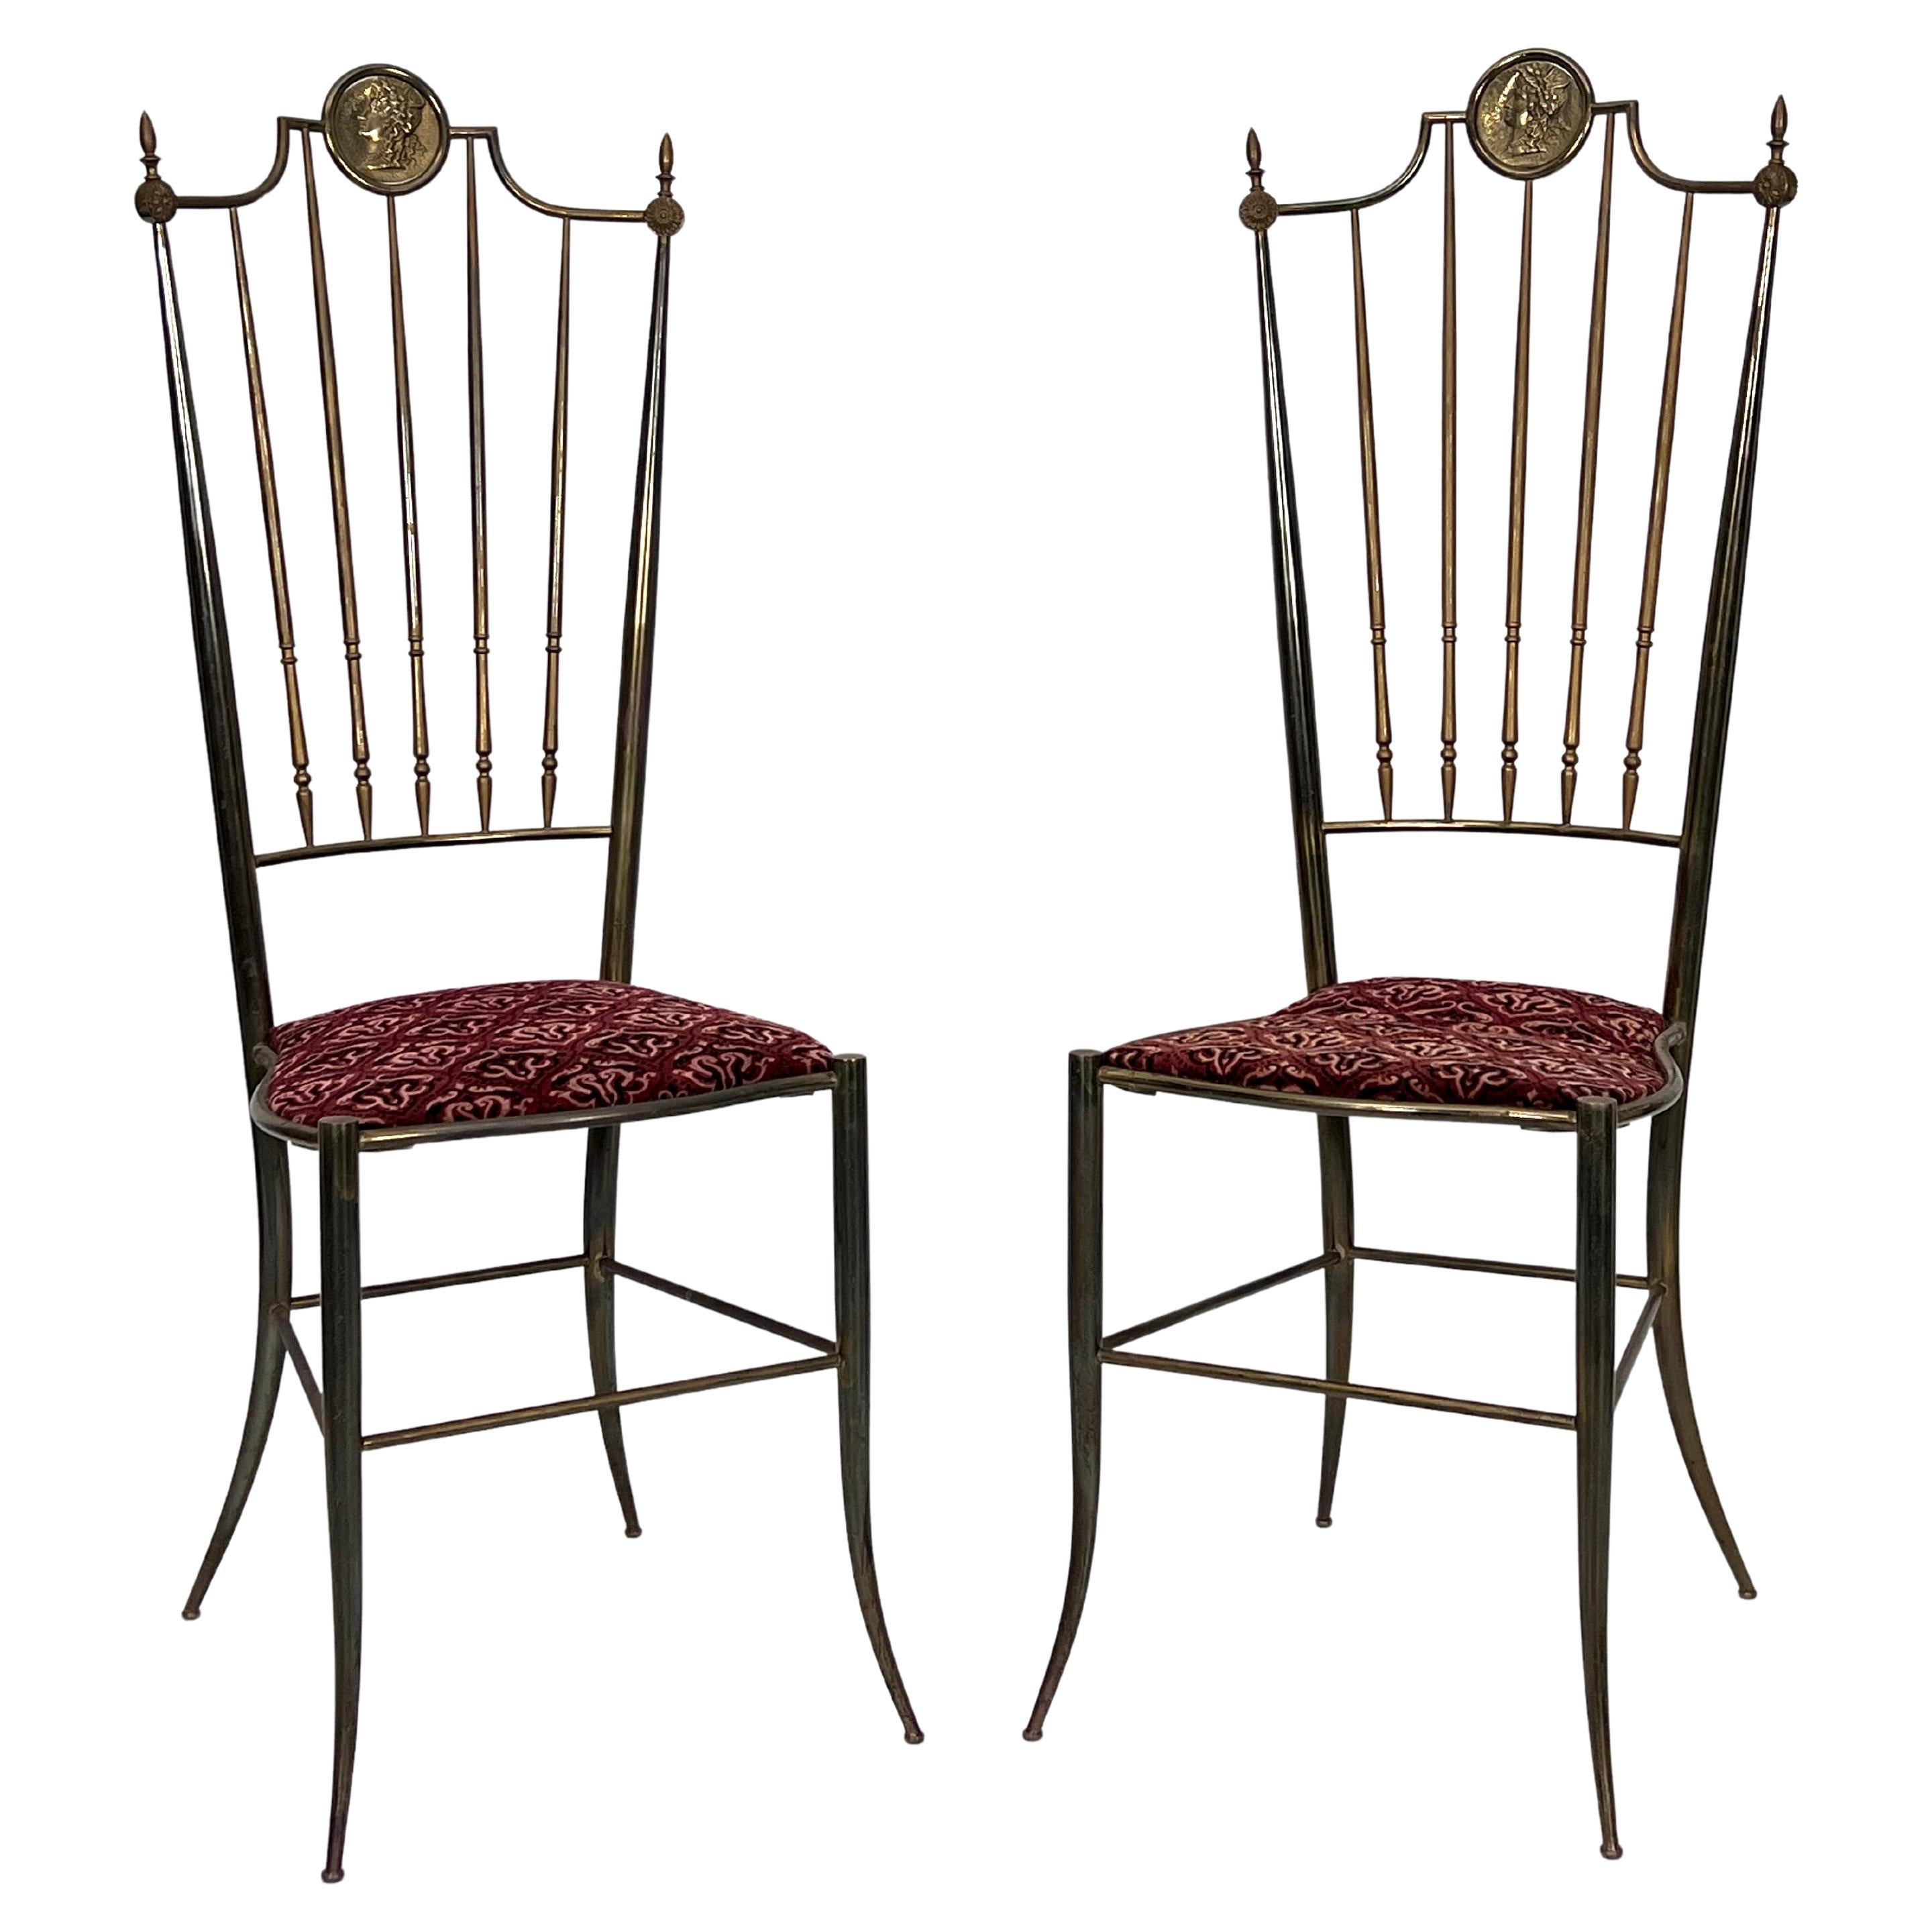 Vintage Pair of Brass Tall Chairs from Chiavari, Italy, 1950s For Sale